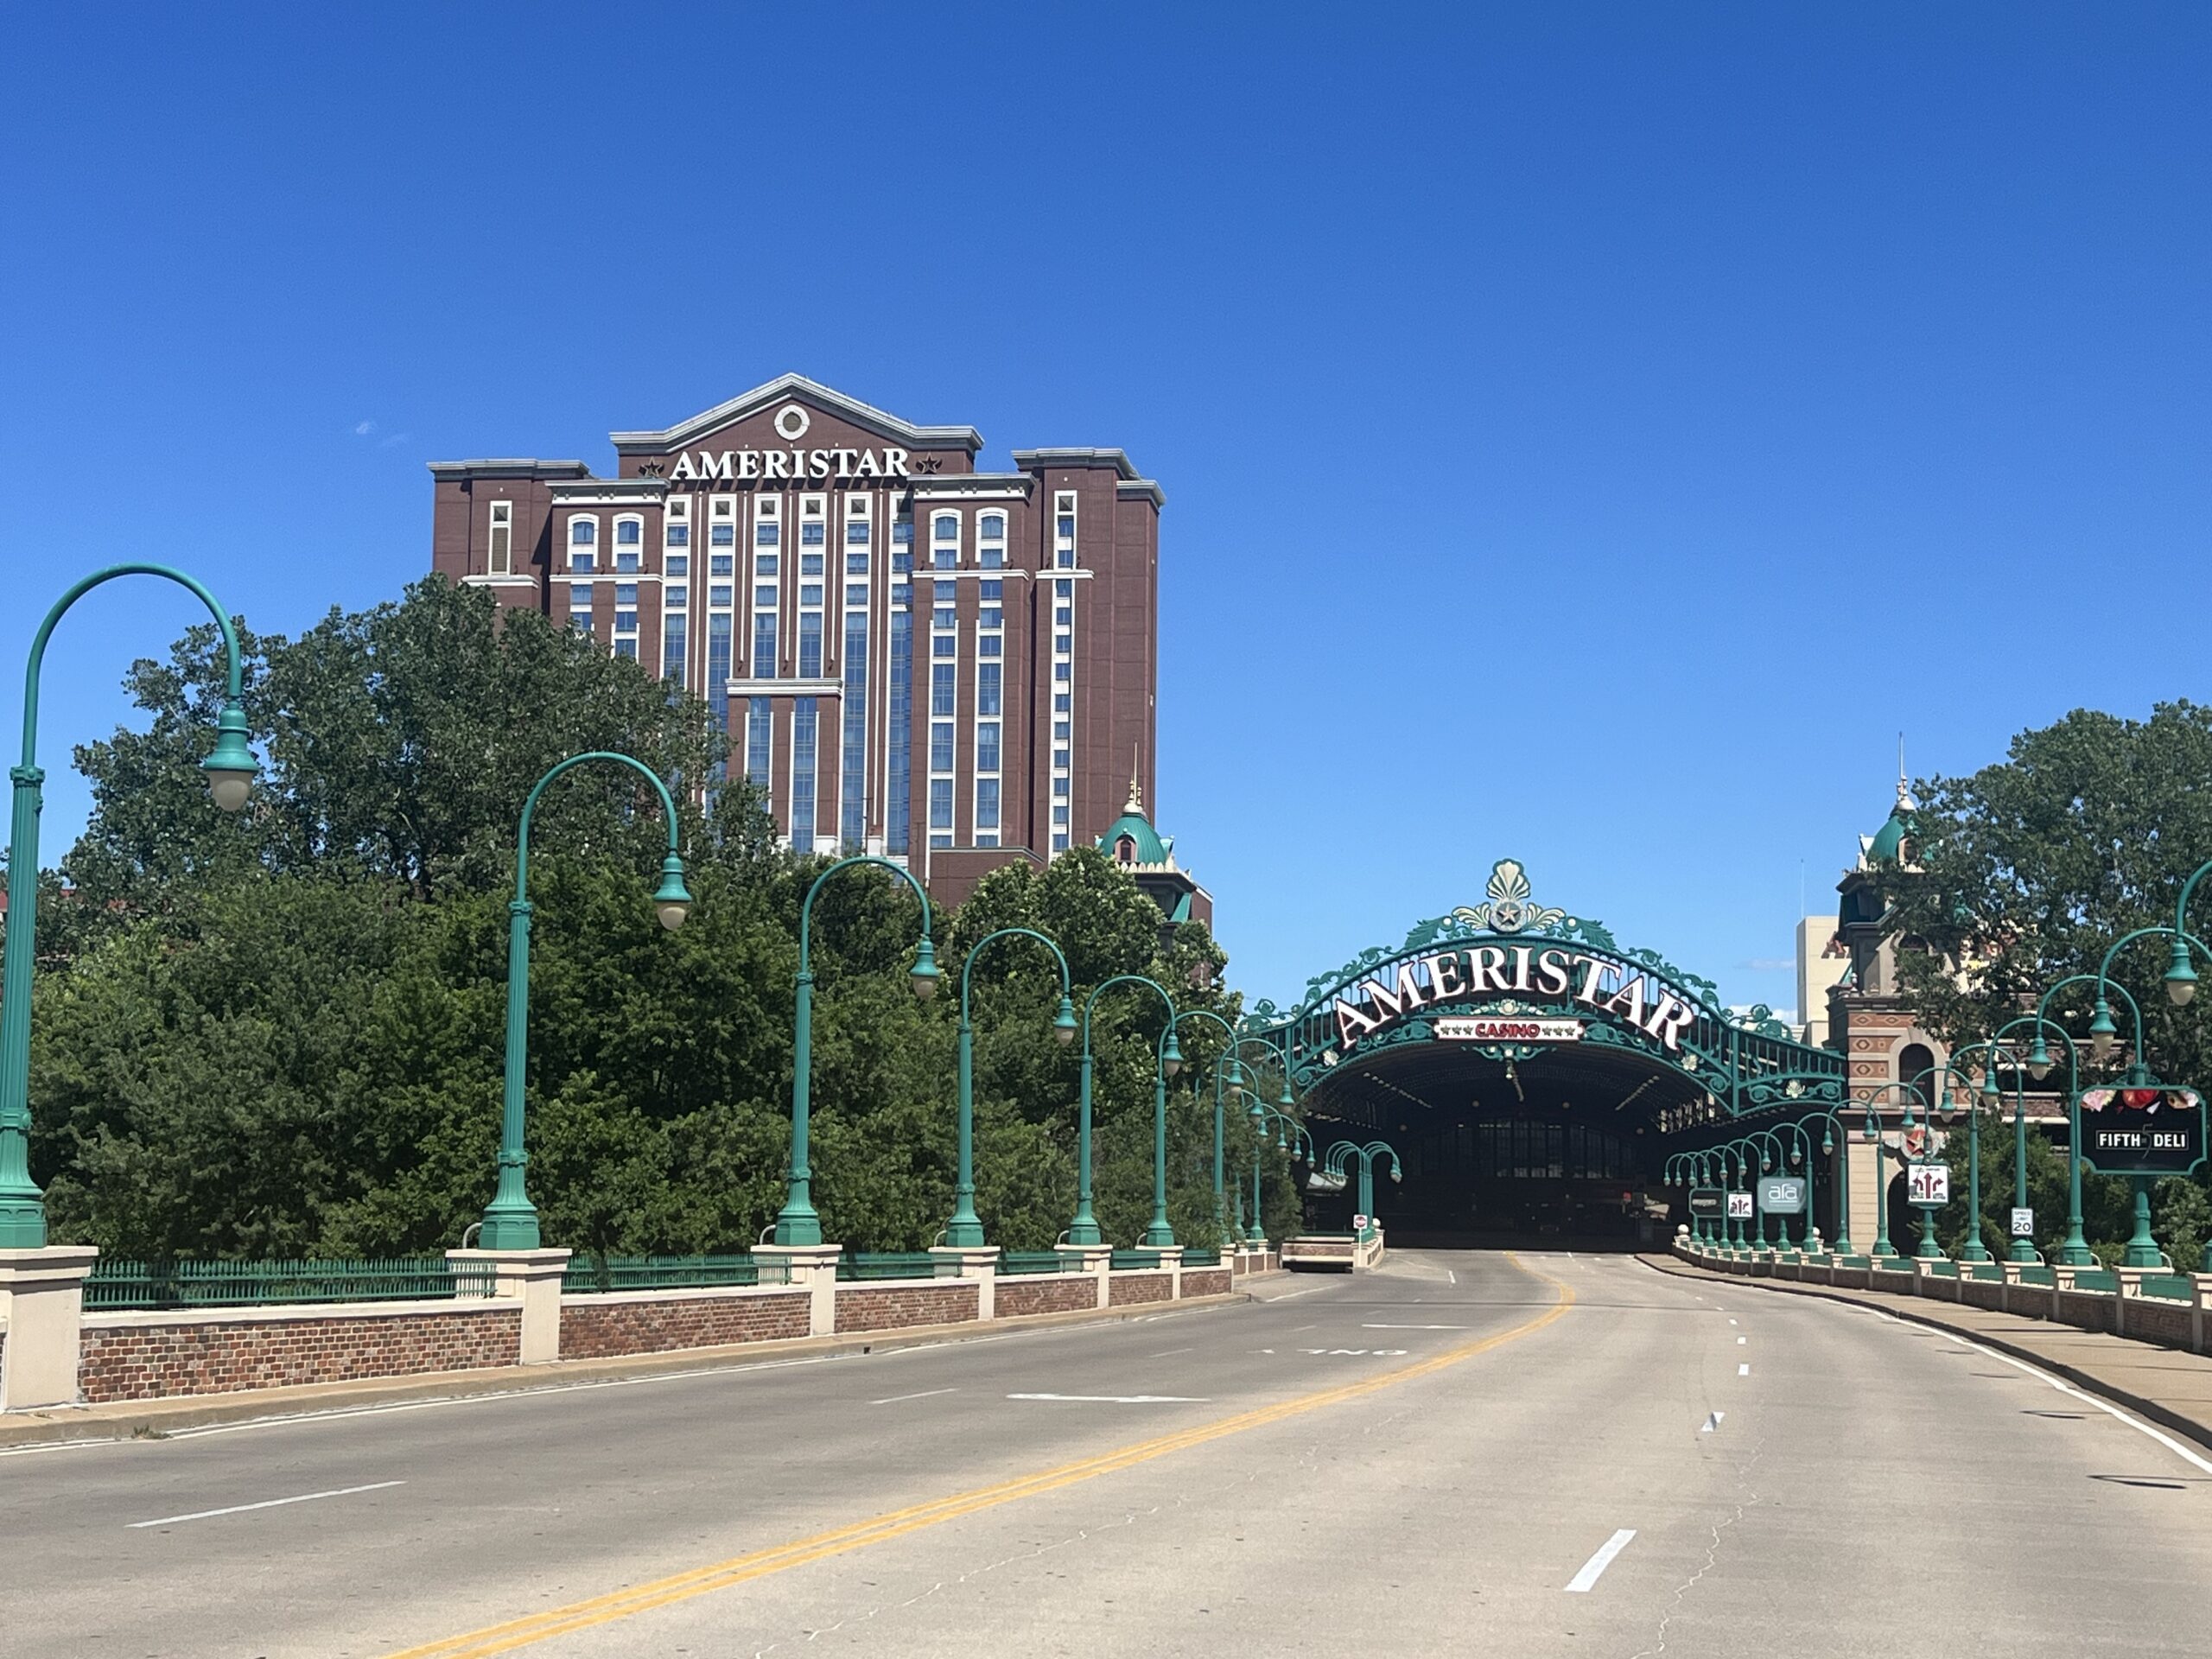 Ameristar Casino St. Charles added to Directory